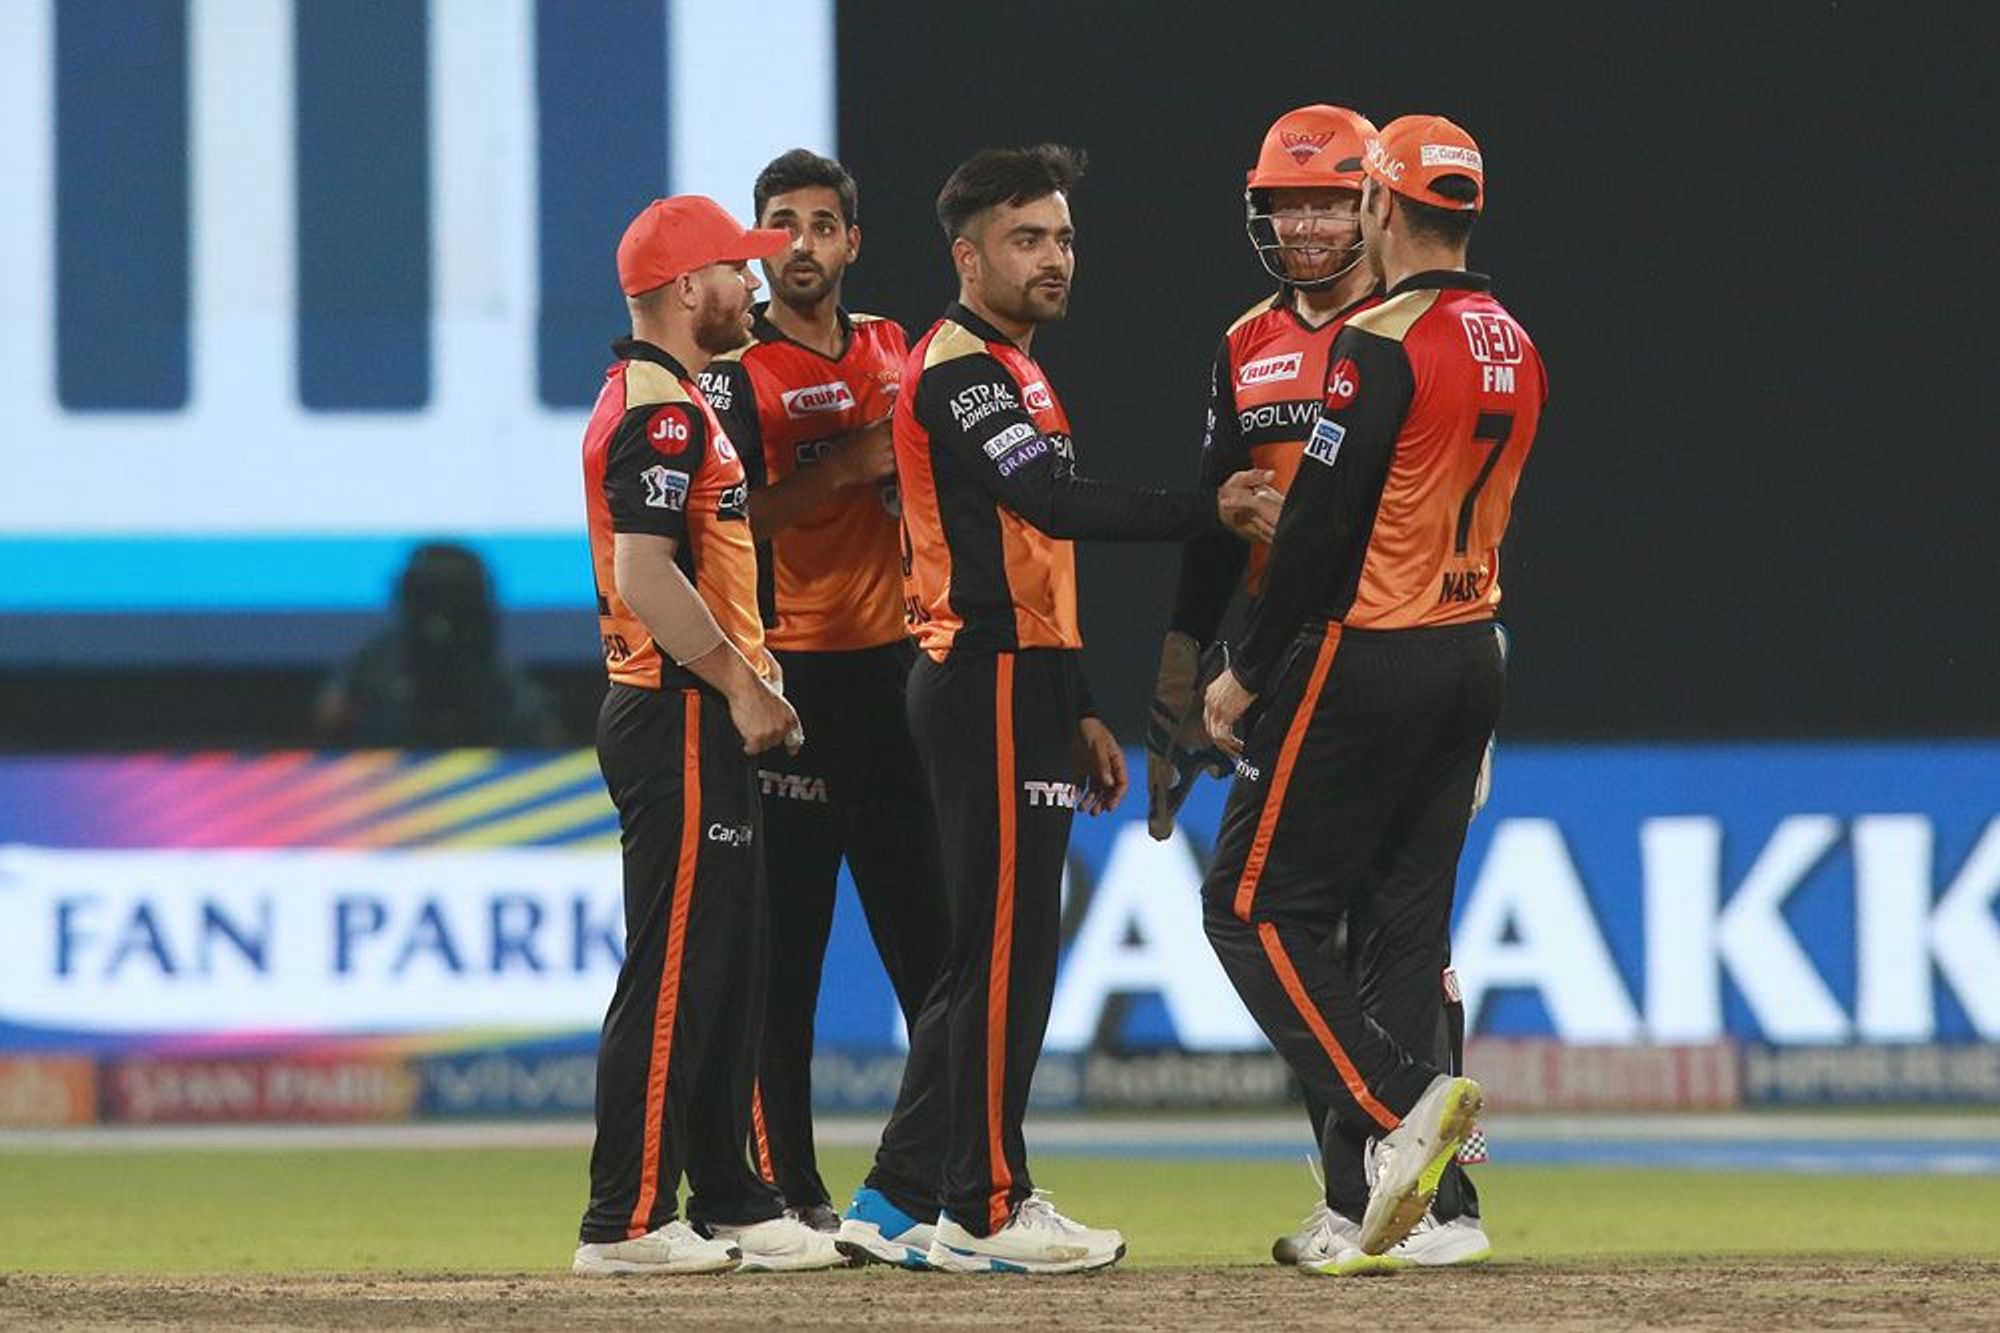 Chuck, Marry and Frill | Who SRH should let go and retain ahead of IPL 2021